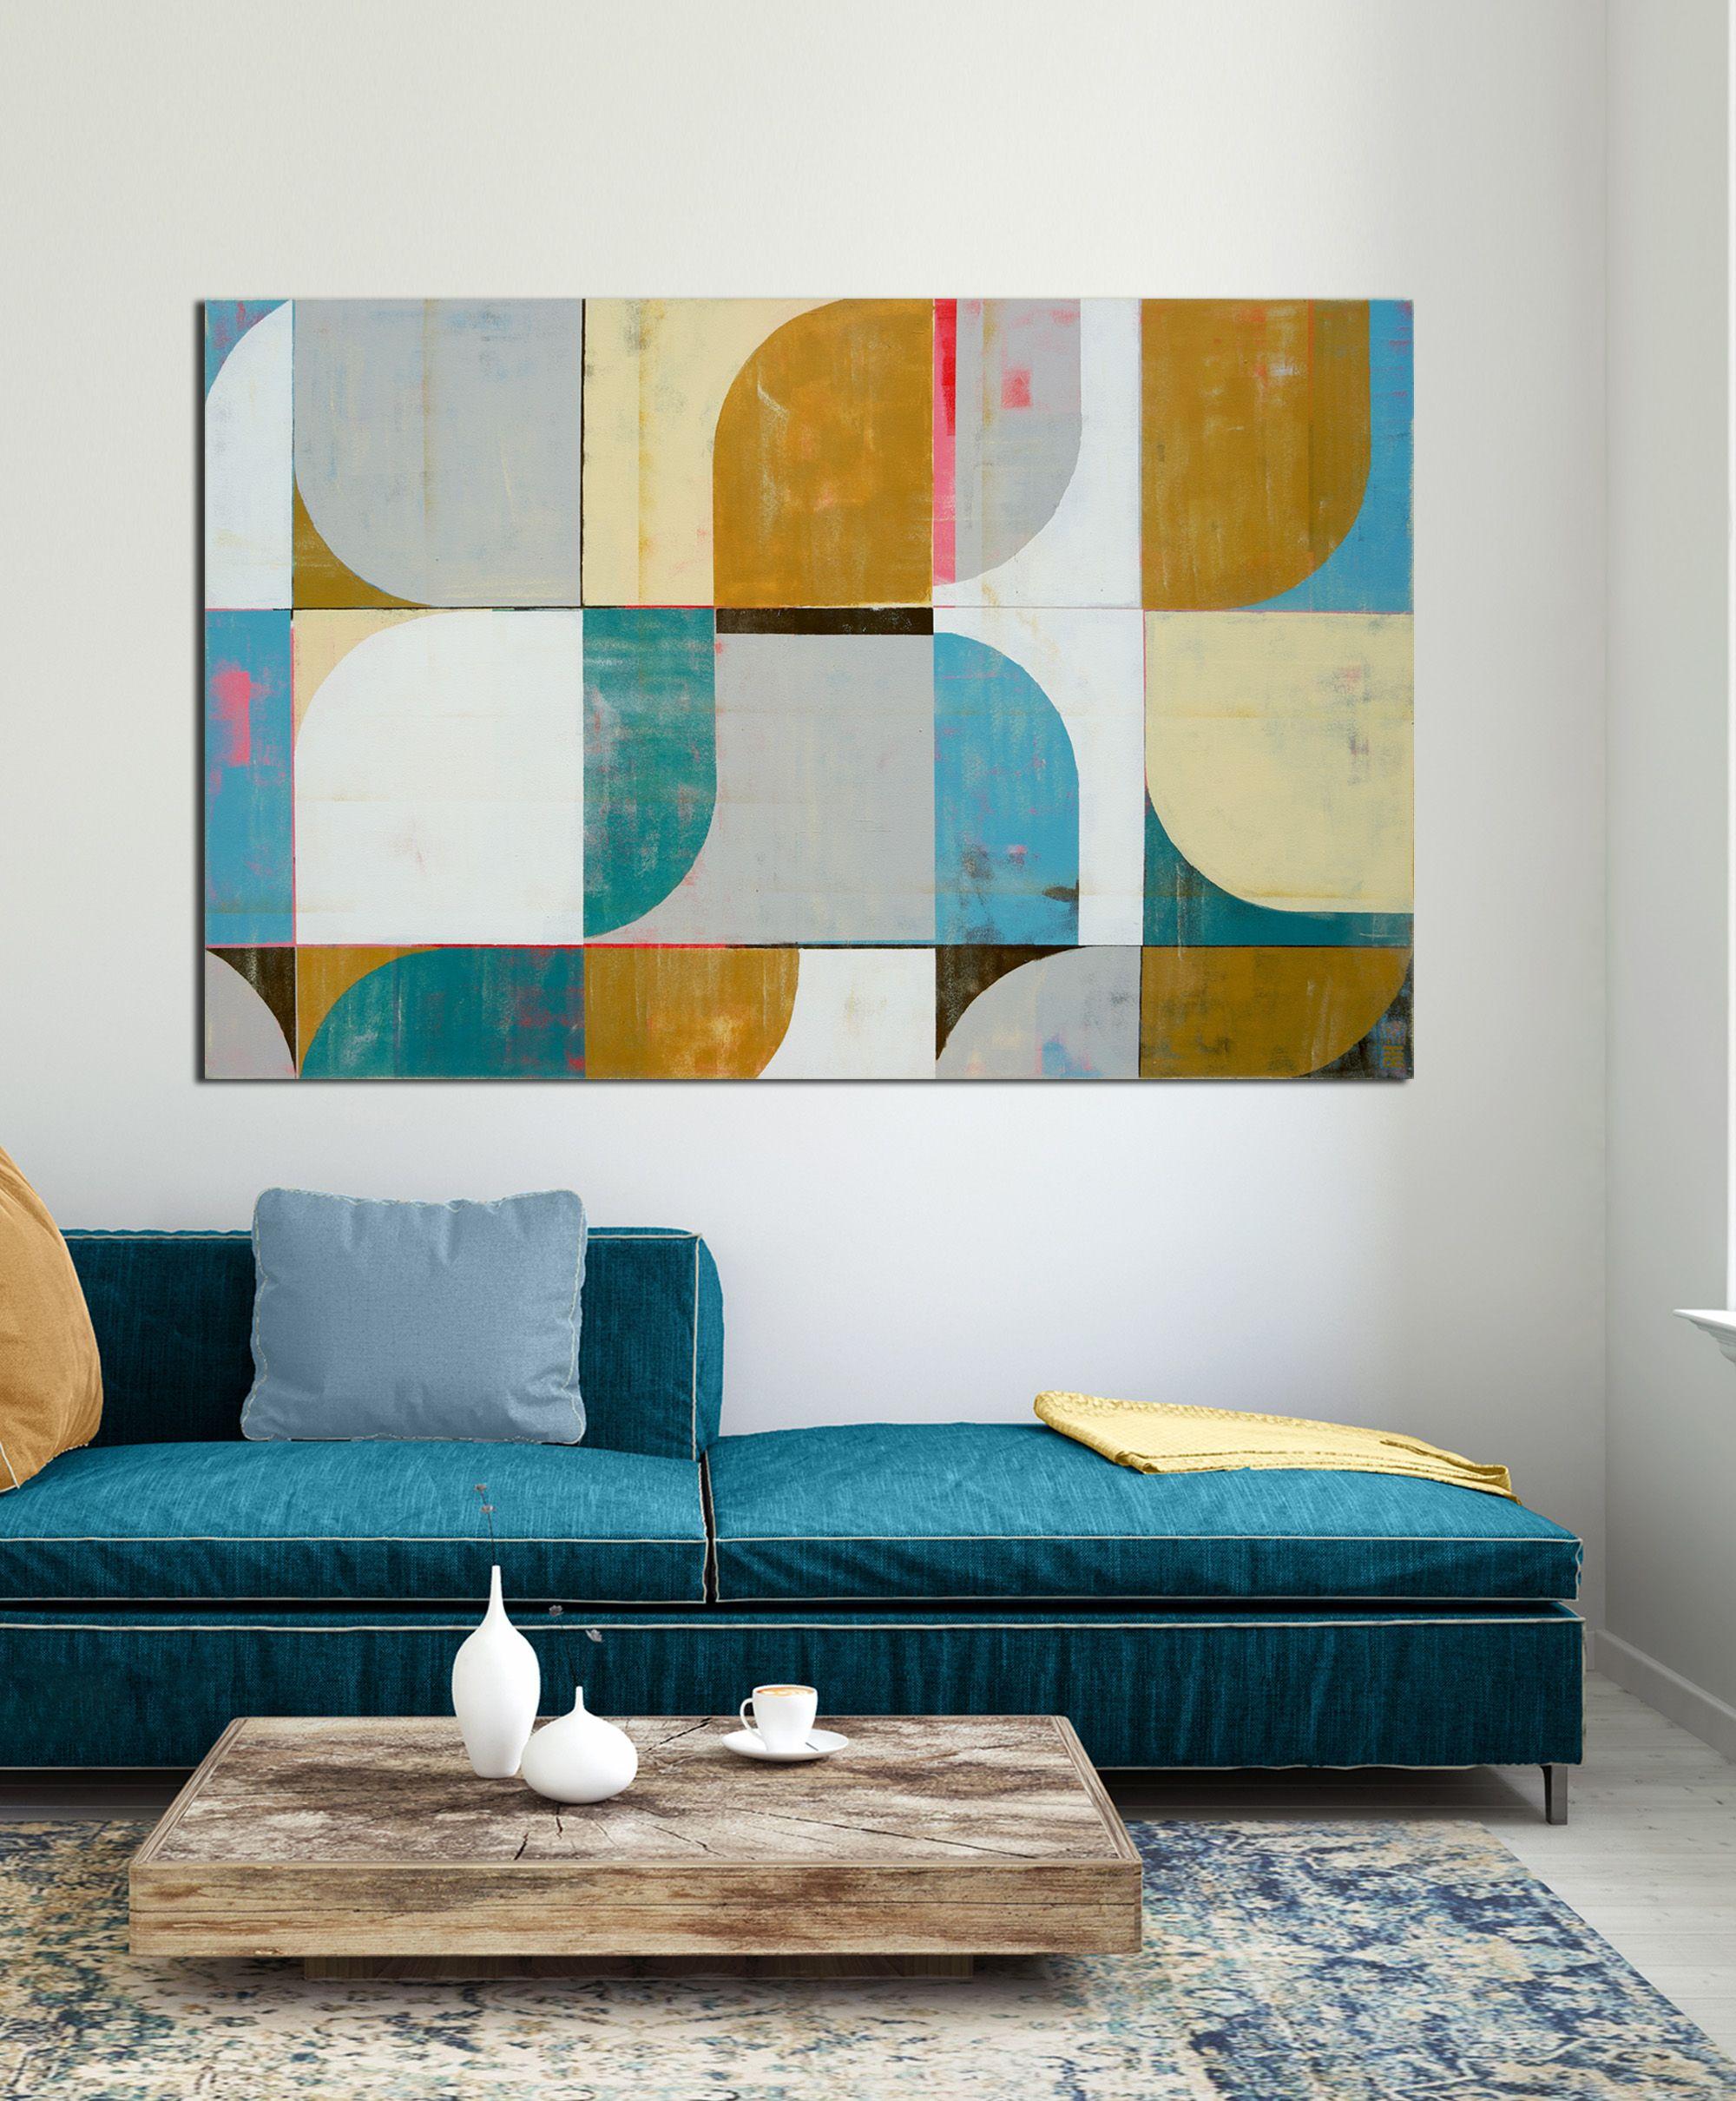 Original artwork created by Ronald Hunter. Circle in Circle collection. This new series represents movement within movement, go with the flow. A balanced abstract composition of round forms, made with many layers of acrylic paint. This artwork will